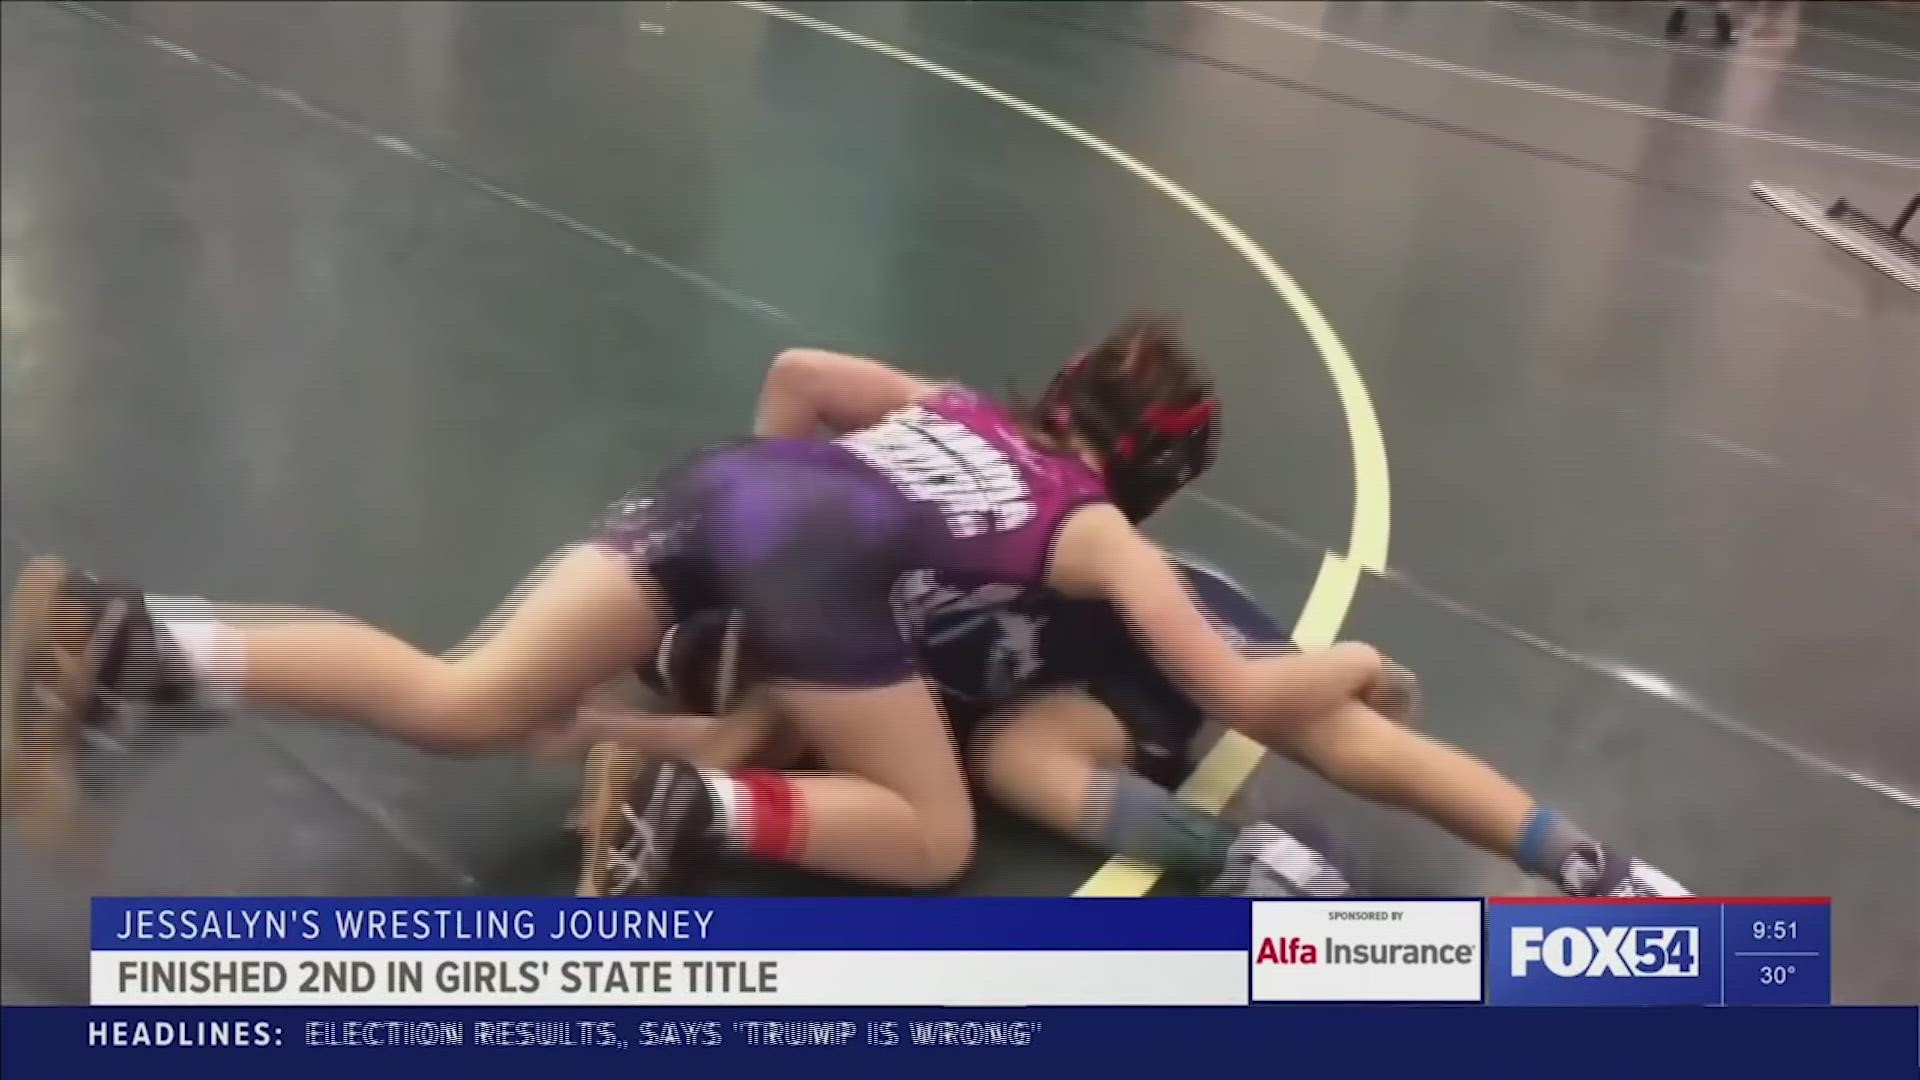 "It doesn't matter to me if I wrestle boys or girls. it's just like wrestling just a person."